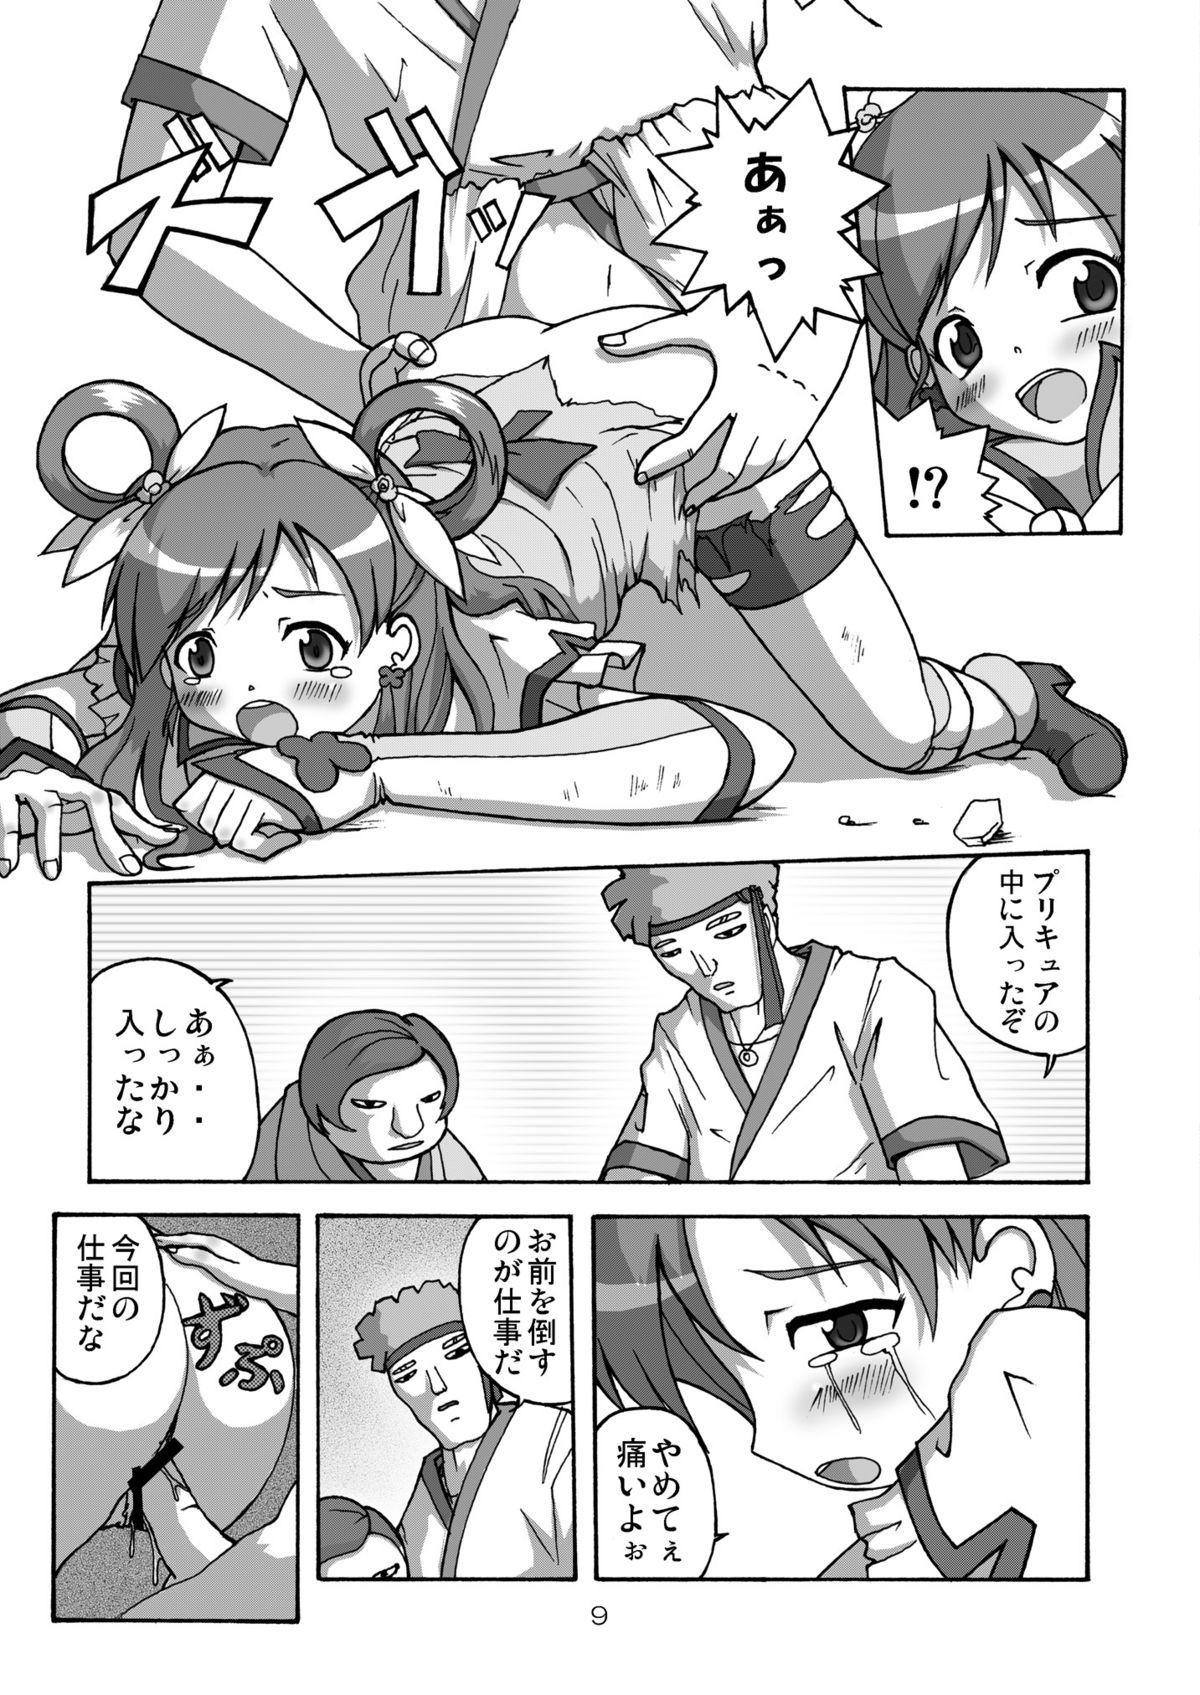 Facefuck Bara no senshi-tachi | Fighter of Rose - Pretty cure Yes precure 5 Old - Page 9